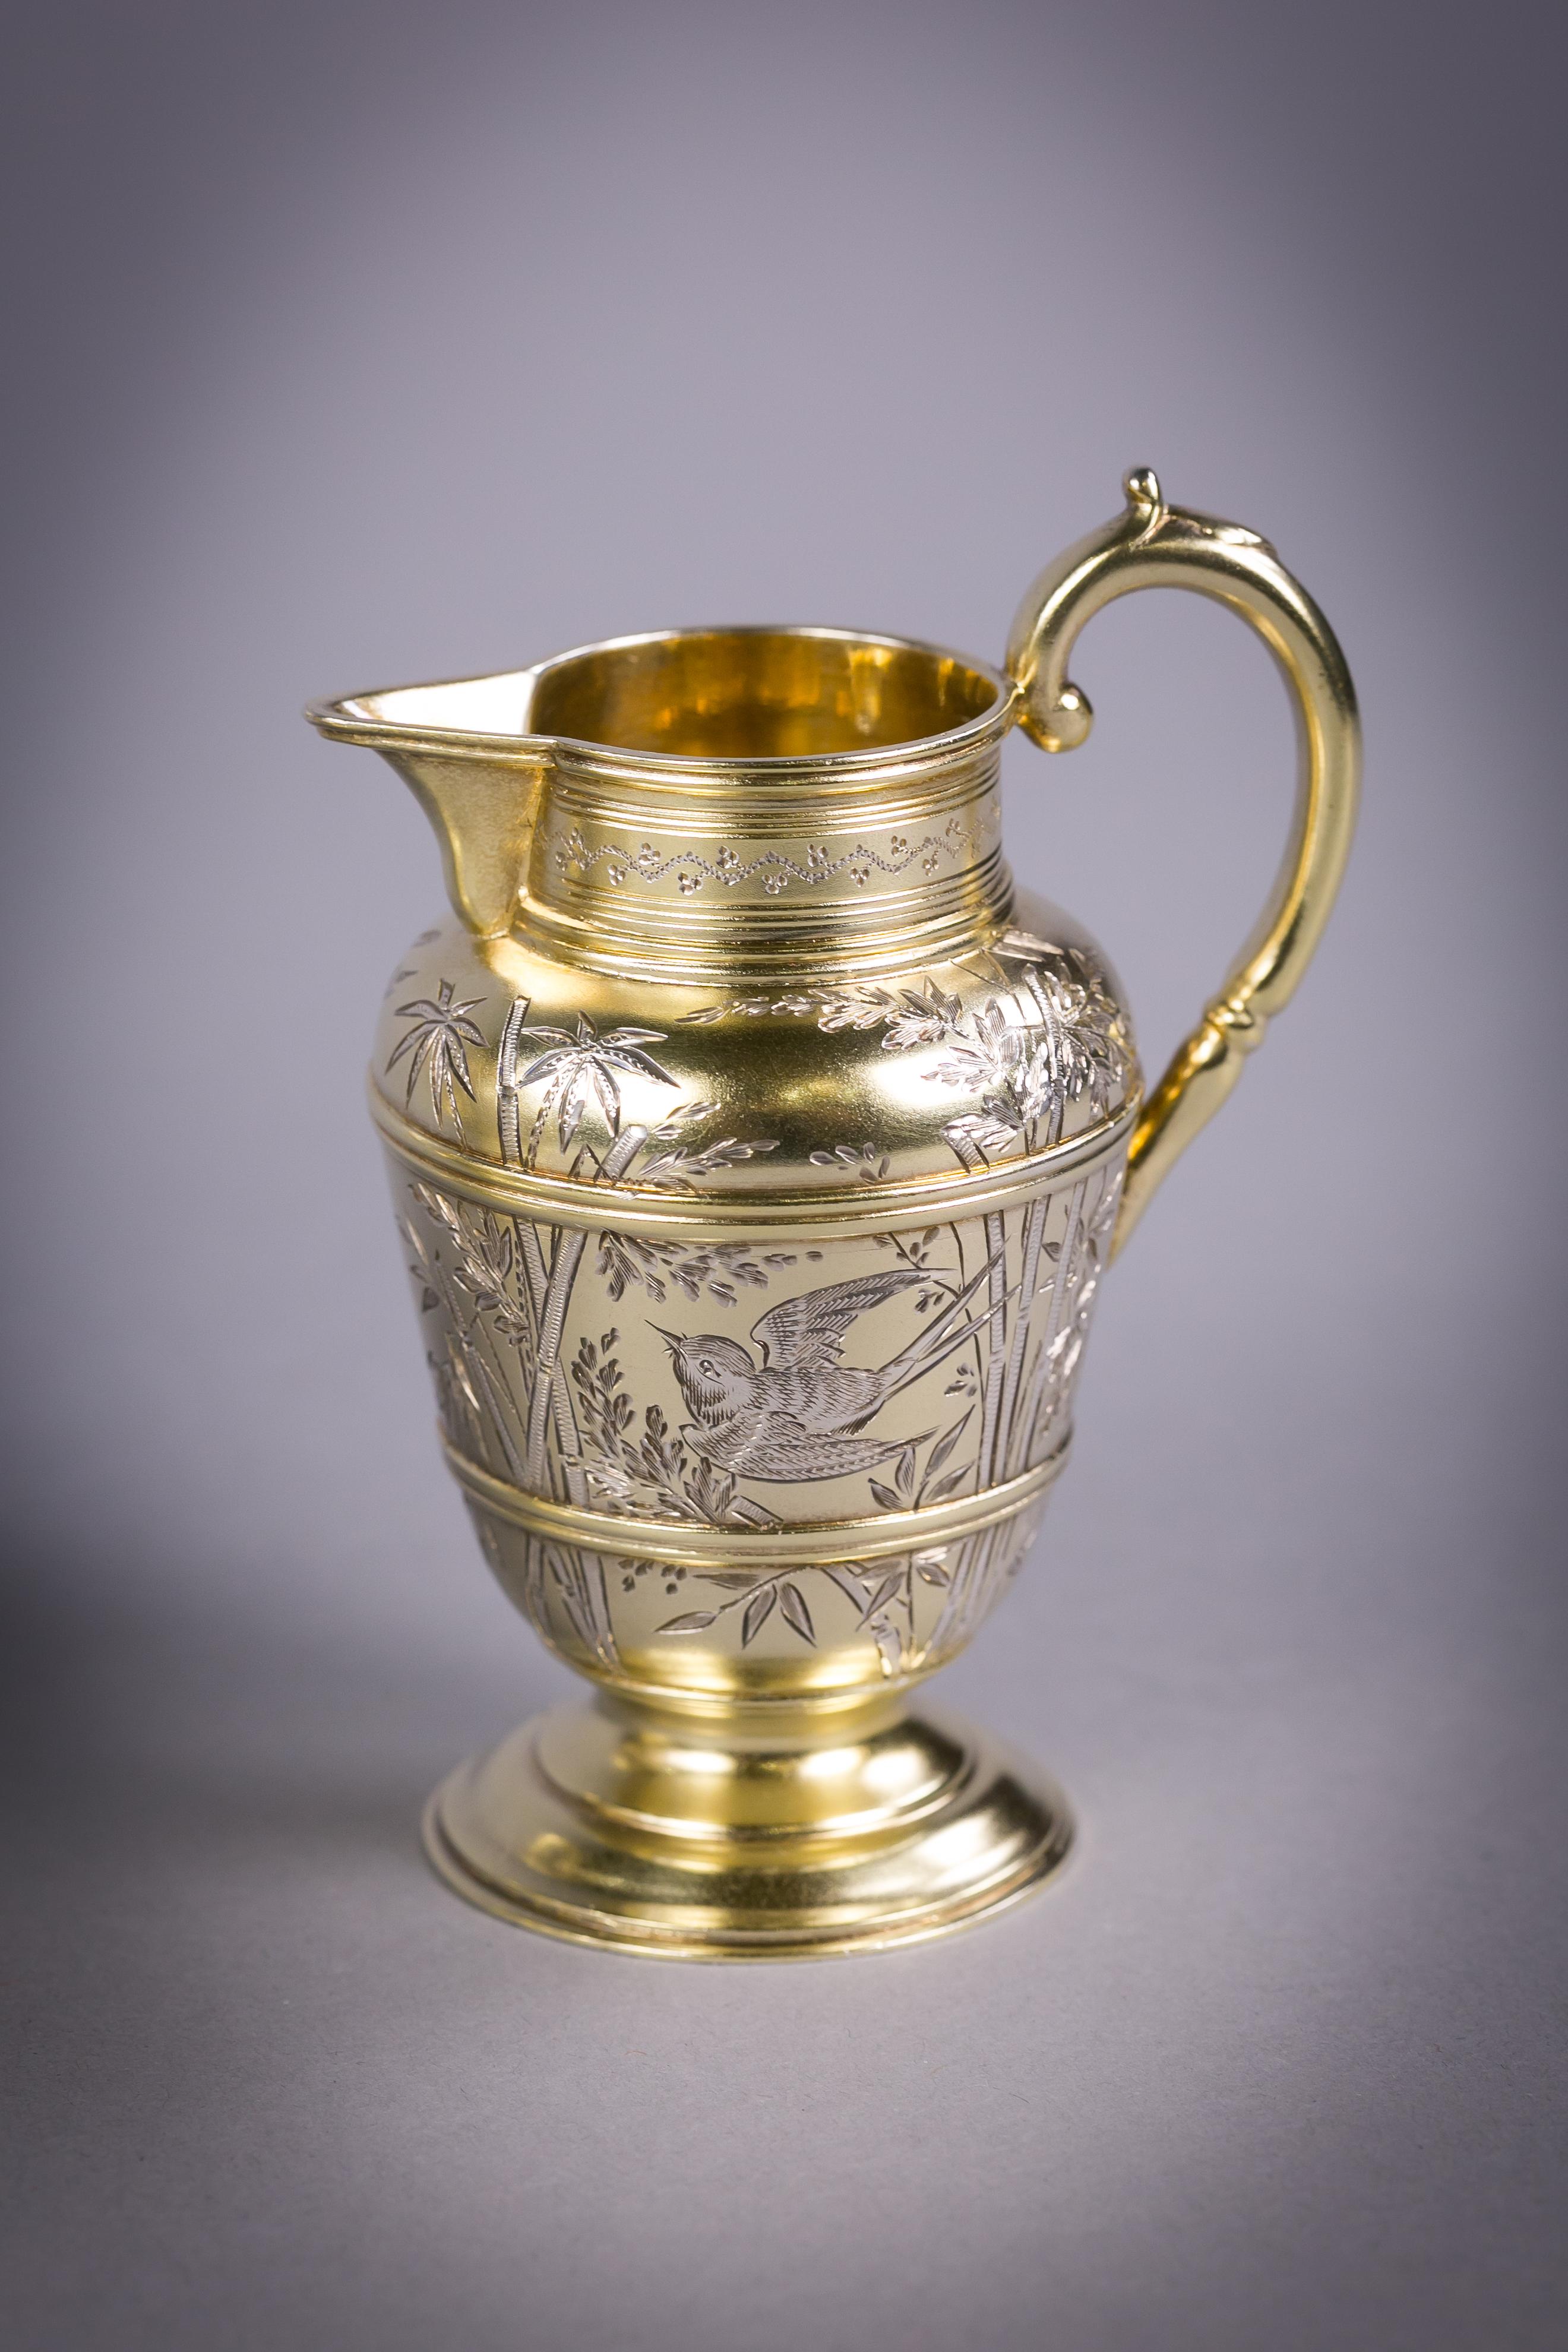 Marked: London, 1878, Maker: Frederic Elkington. Comprising a teapot, cream jug, sugar bowl and pair of sugar tongs. Finely engraved in Japanese taste with beards and bamboo.